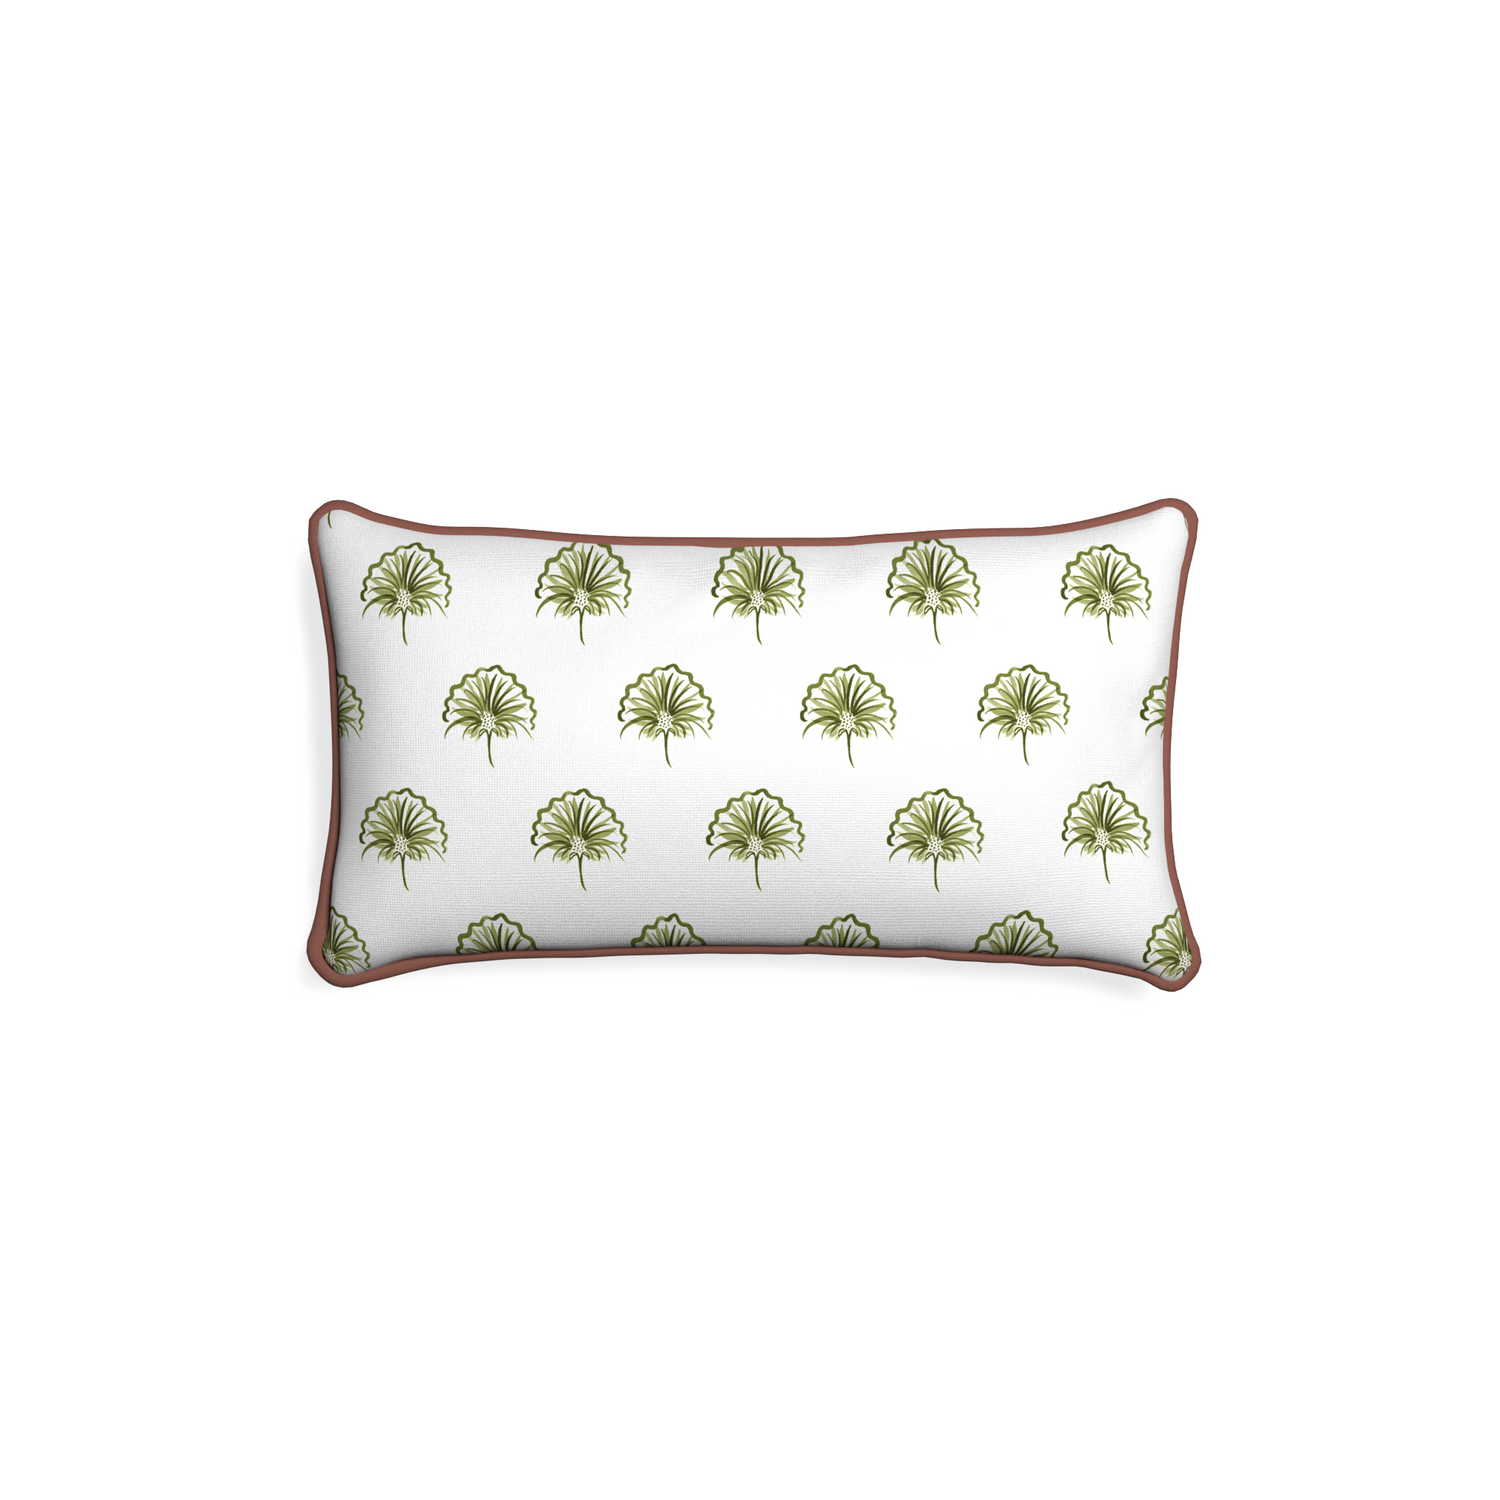 Petite-lumbar penelope moss custom green floralpillow with w piping on white background